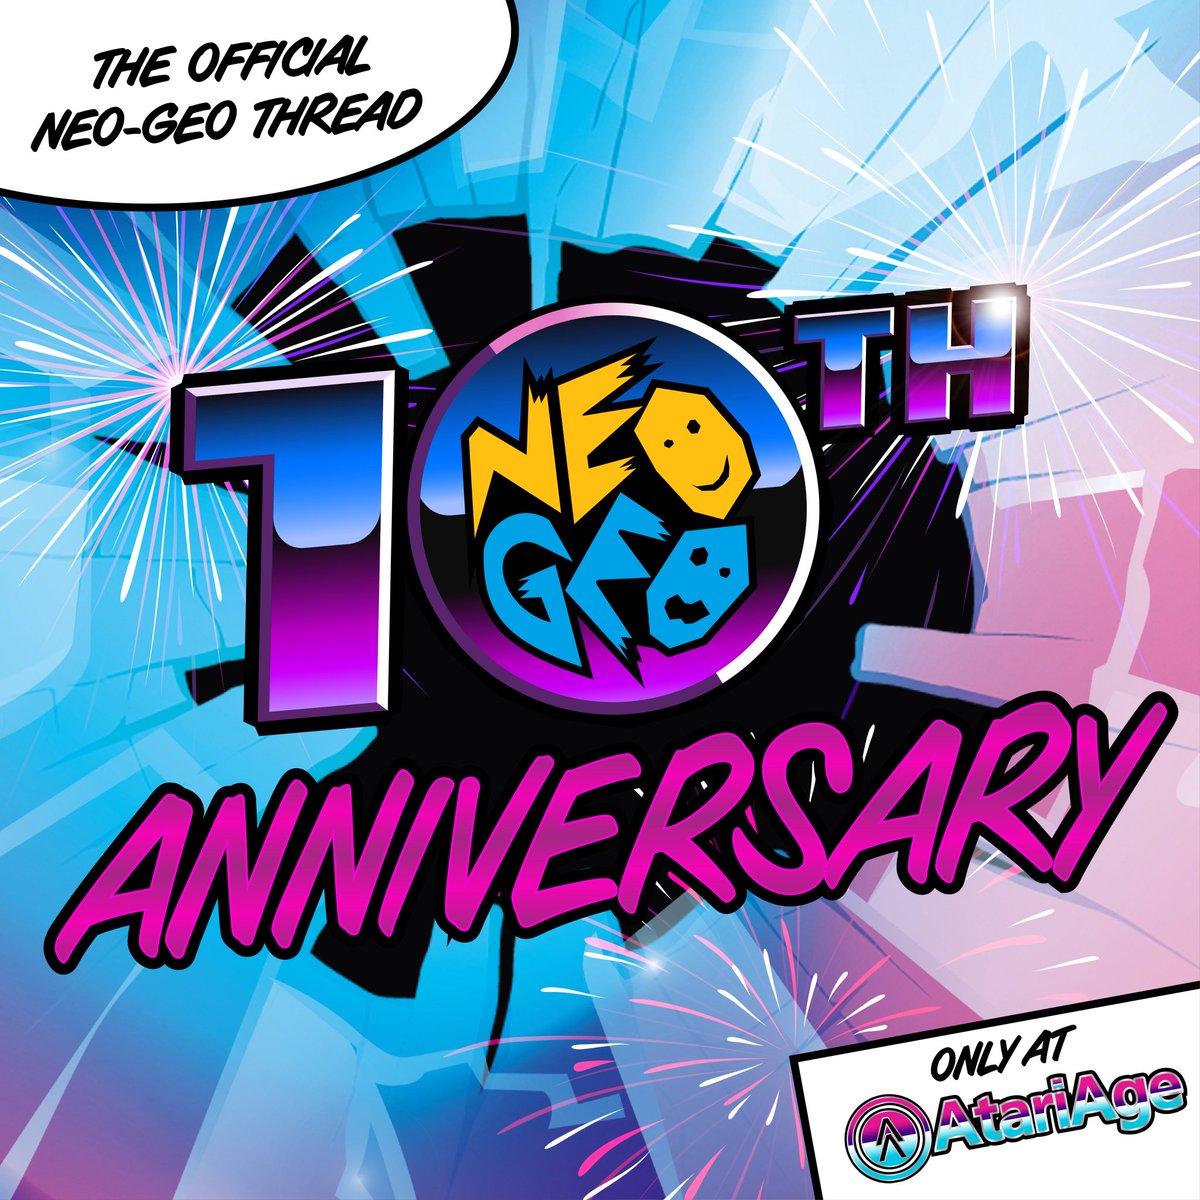 Today's the 10th anniversary of the official Neo Geo thread on Atari Age. Congrats @Fdurso224Durso on an amazing milestone and for all the work you do for the community. Check it out: forums.atariage.com/topic/223548-t…